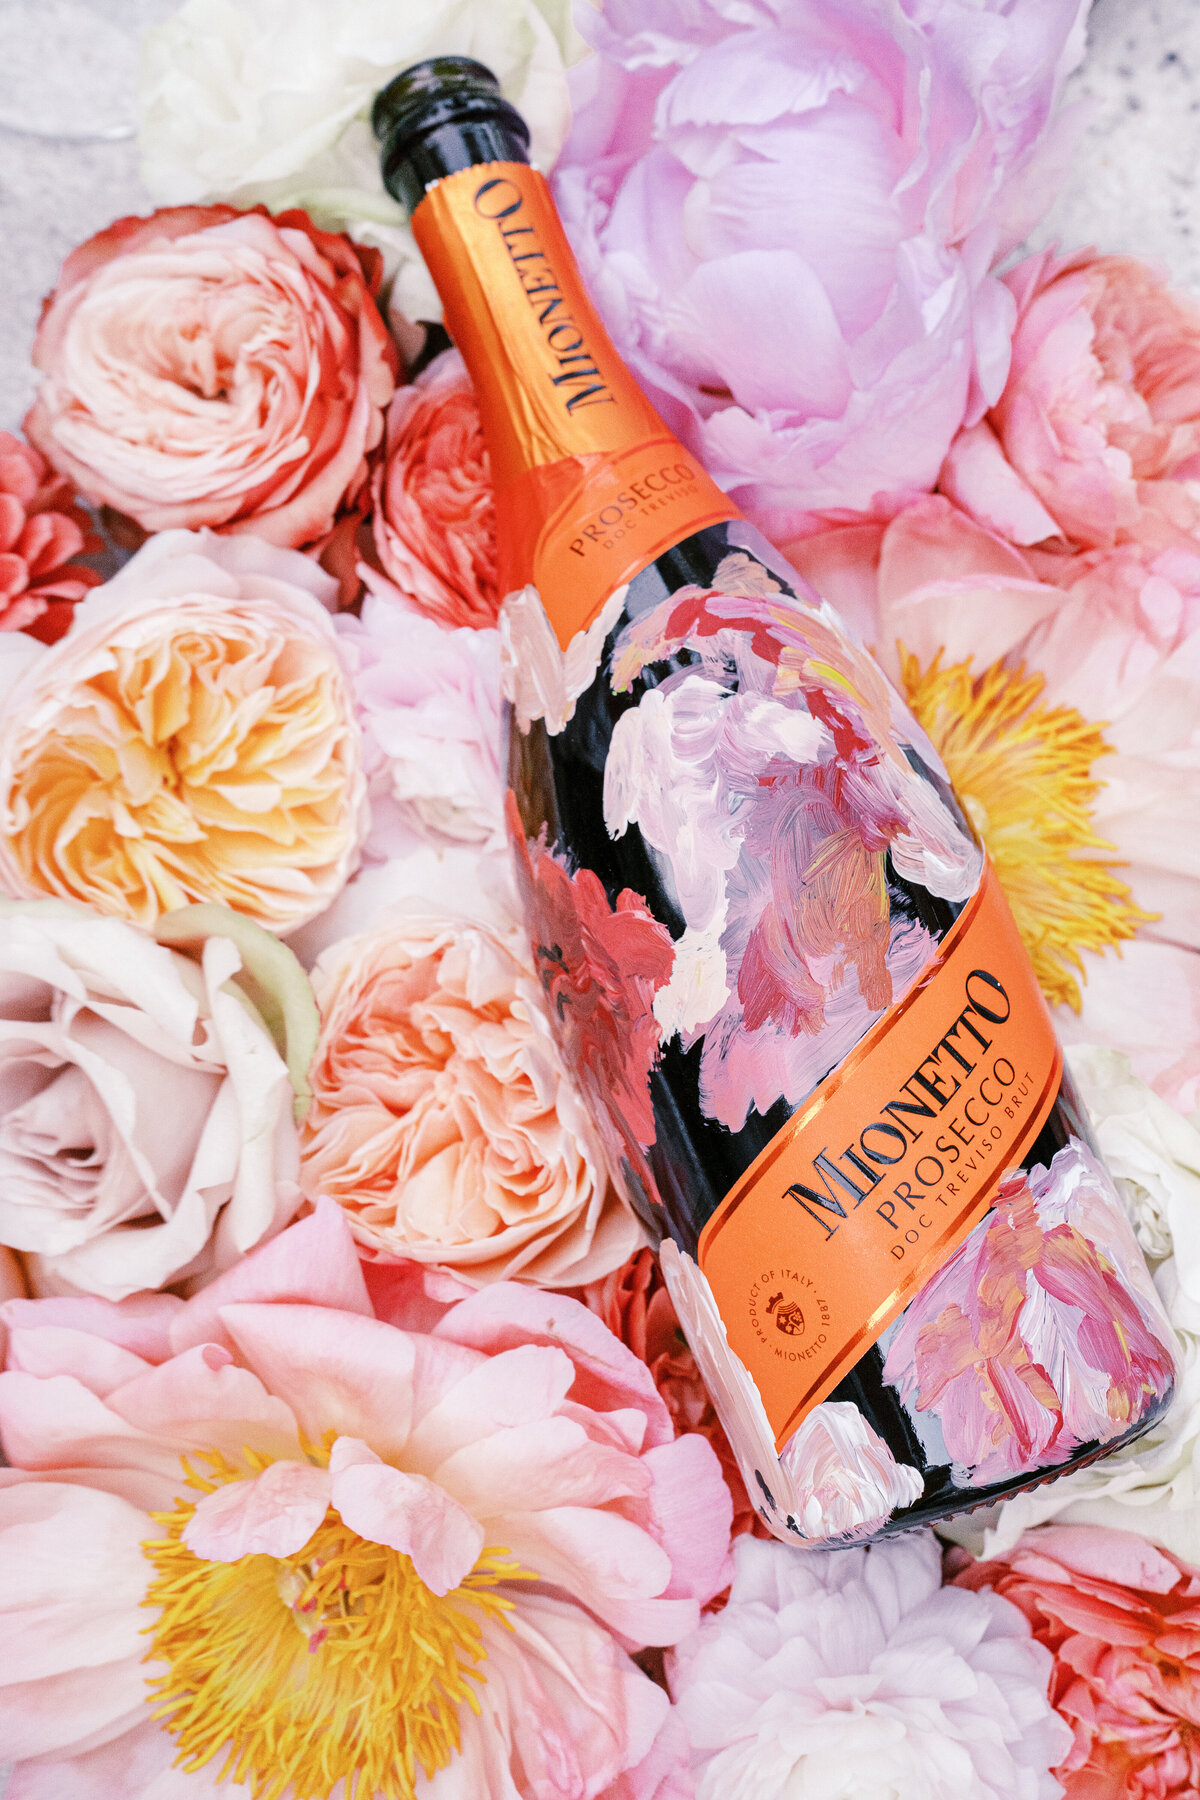 Hand painted Prosecco bottle in pinks surrounded by large colorful flowers for a Lake Como Italy wedding photographed by Lake Como Wedding photographer